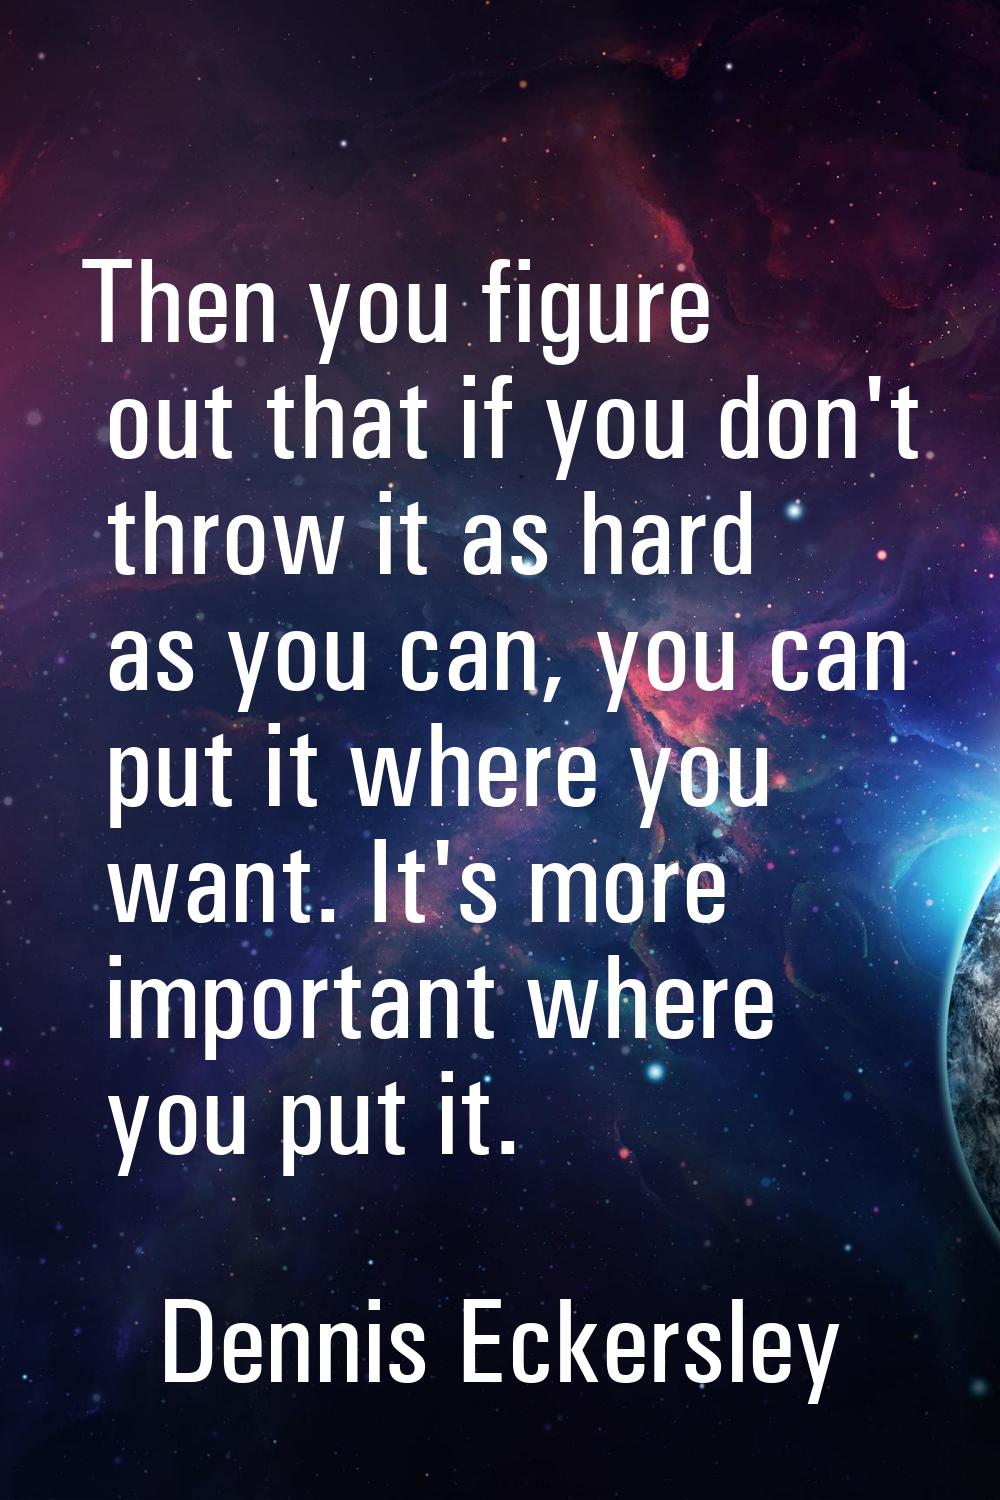 Then you figure out that if you don't throw it as hard as you can, you can put it where you want. I